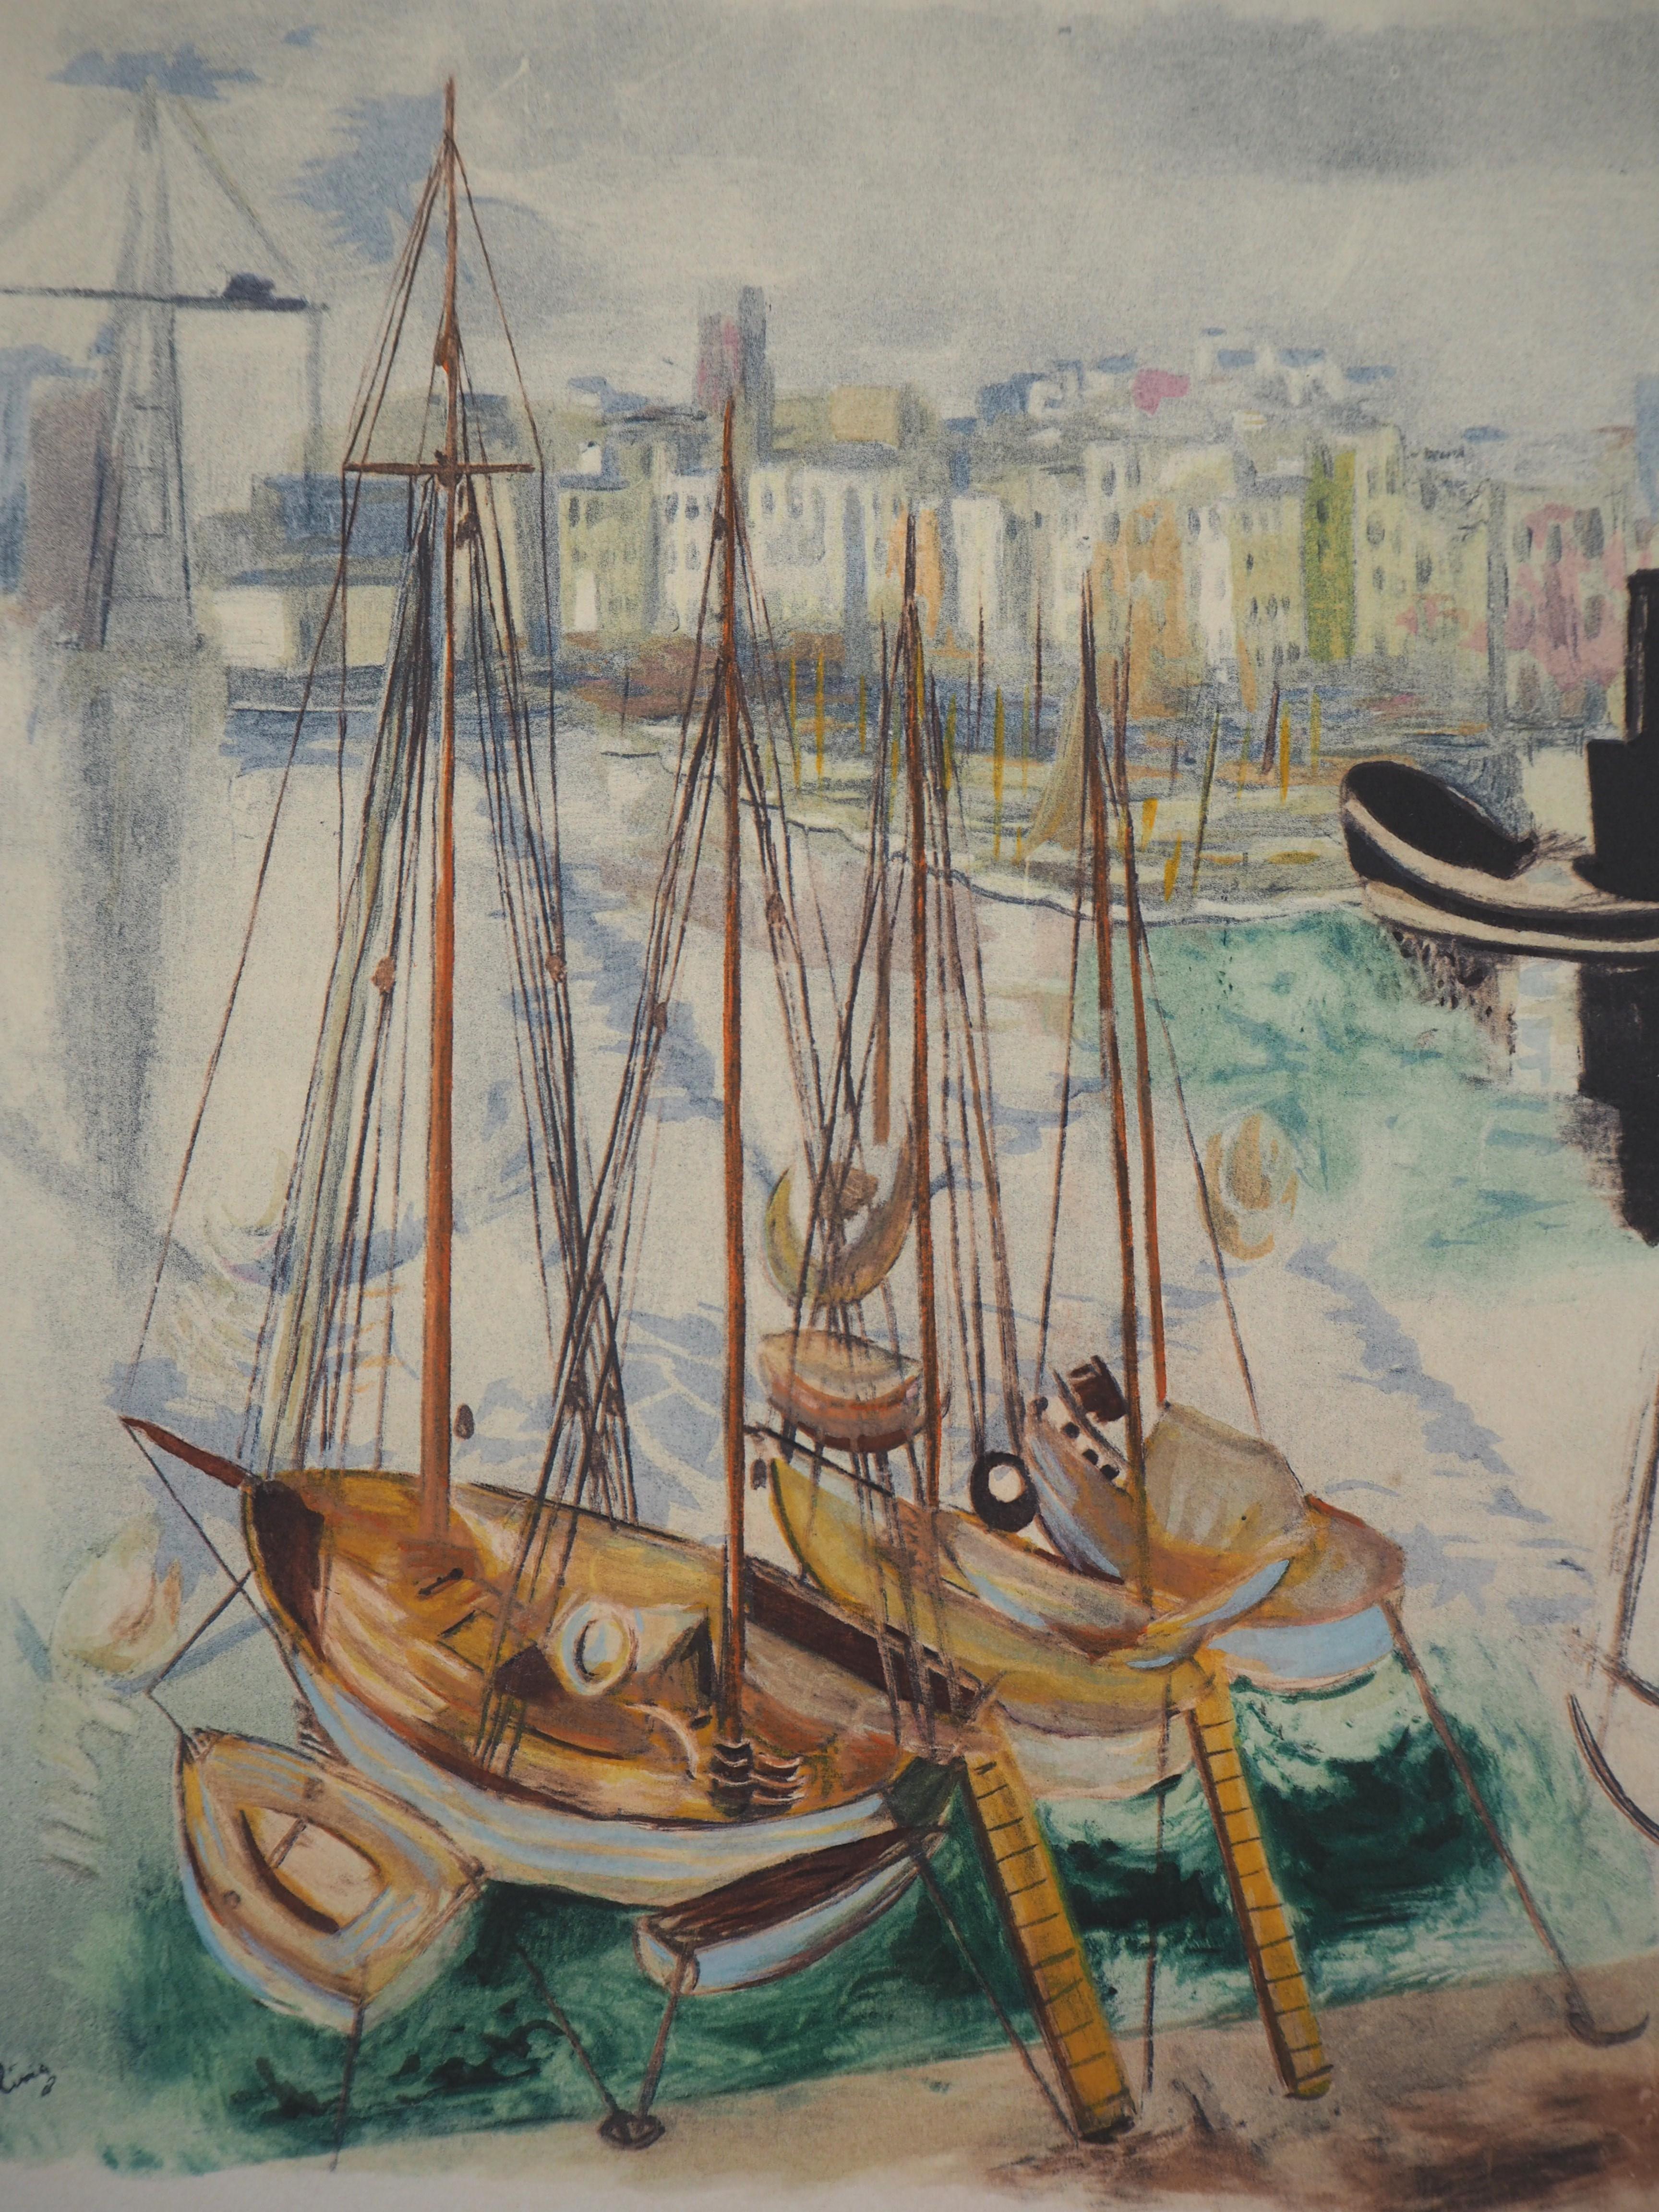 Sailing Boats in French Harbour - Original Lithograph - Print by Moise Kisling